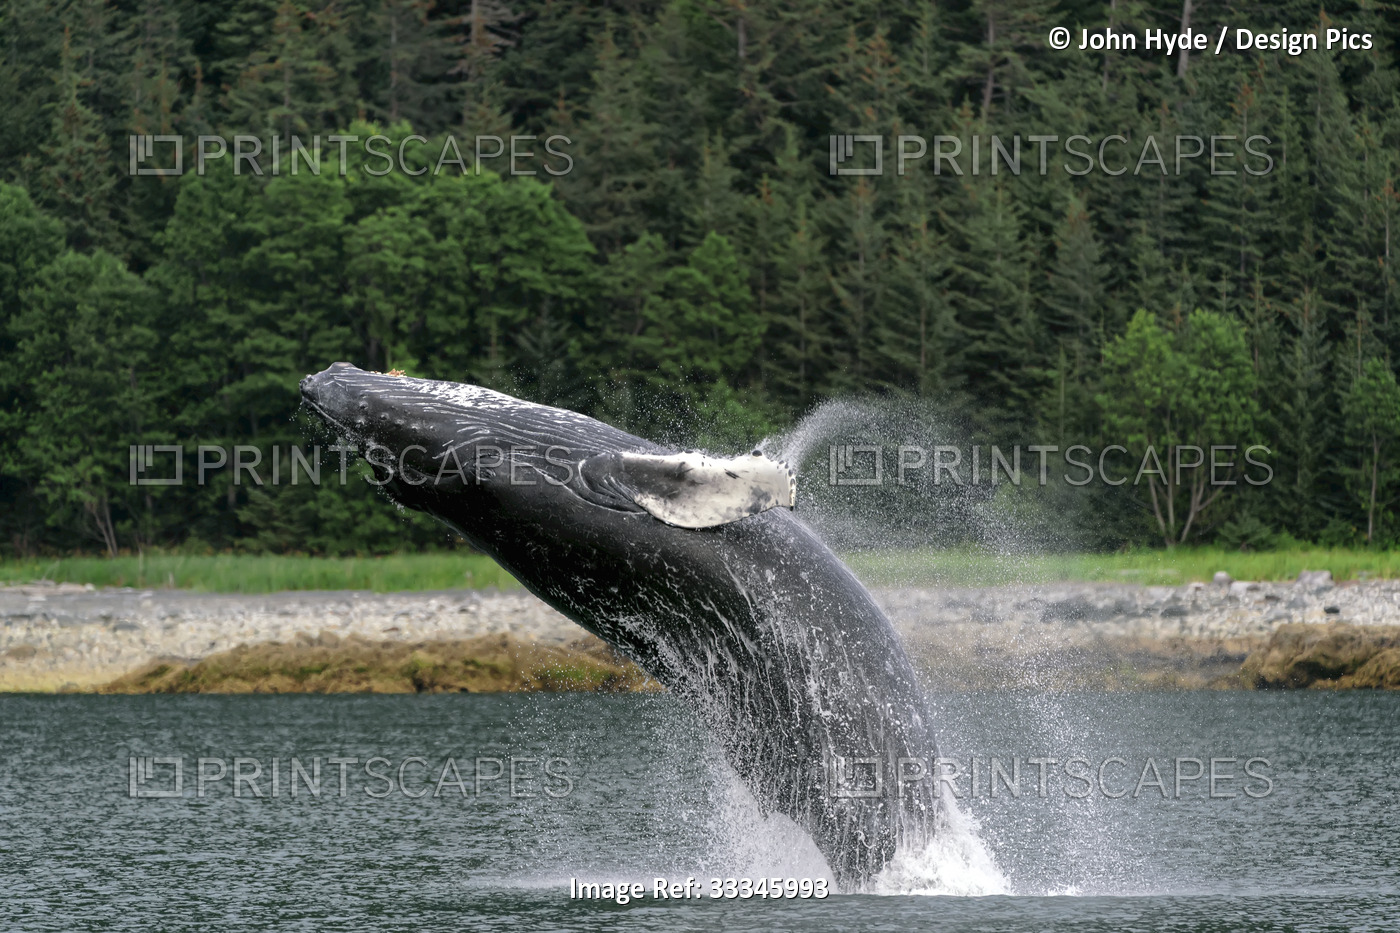 Humpback whale (Megaptera novaeangliae) breaching the water close to shore at ...